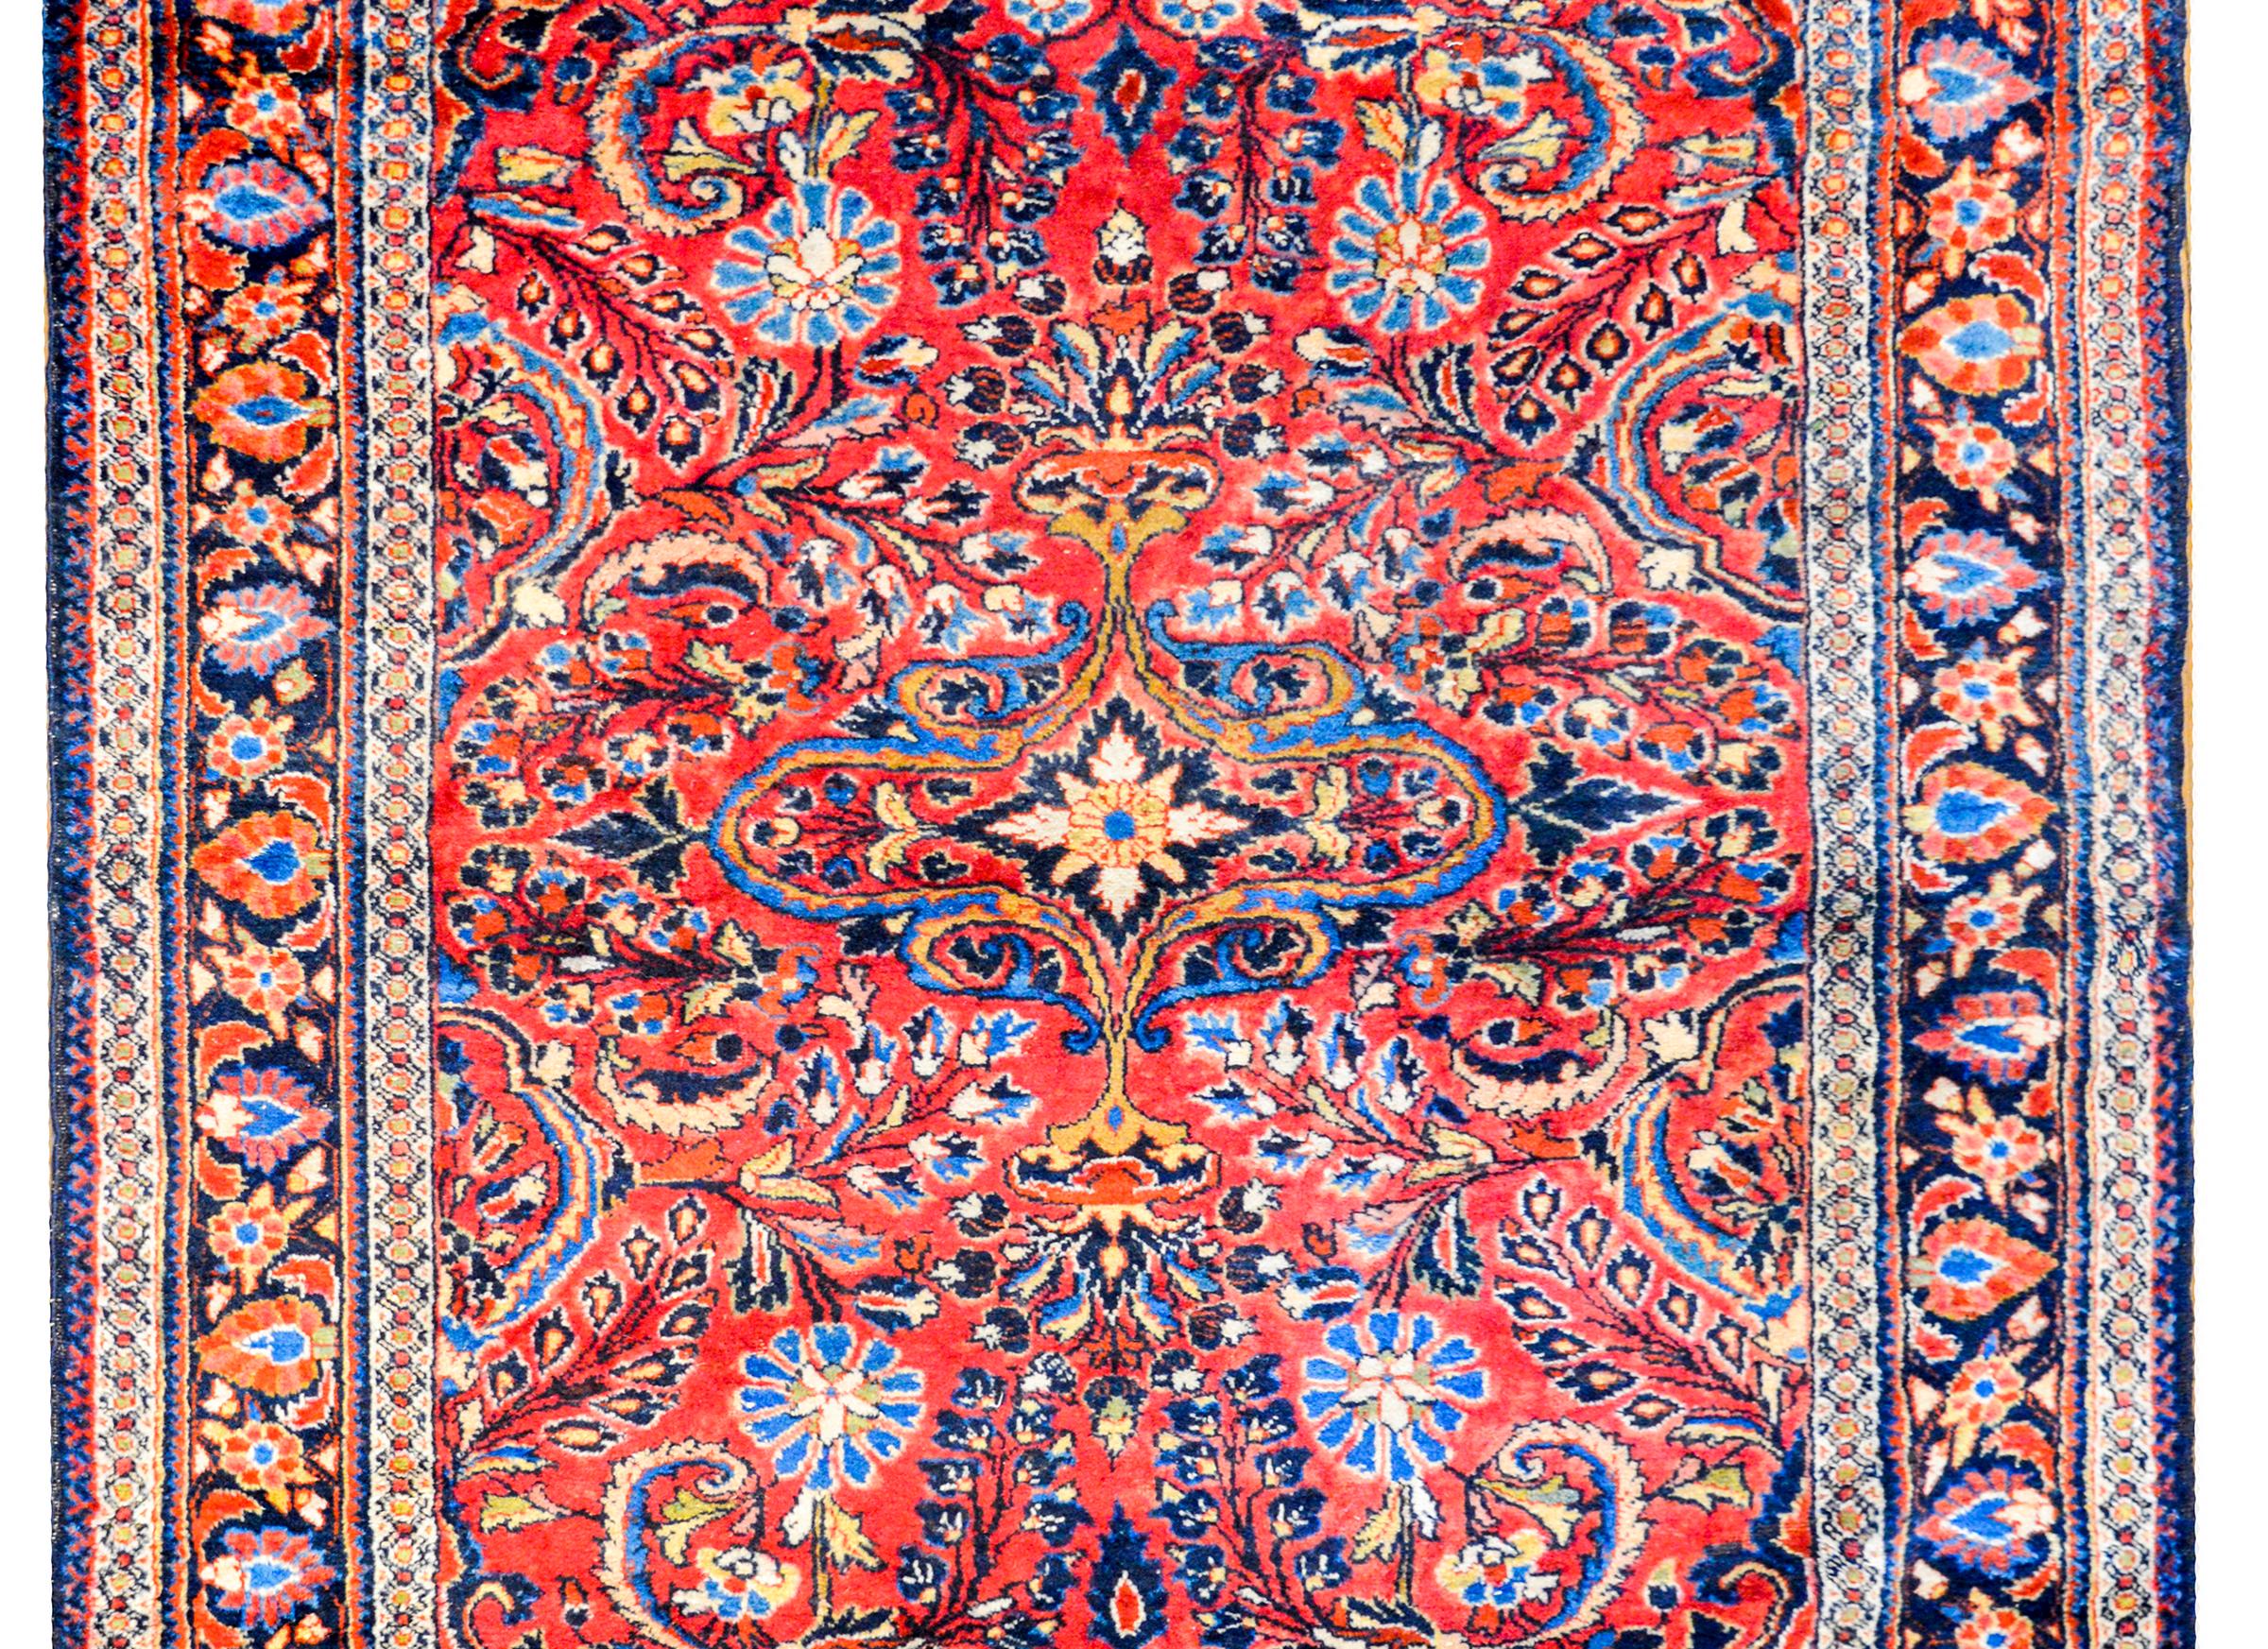 A beautiful early 20th century Persian Lilihan rug with a large-scale mirrored floral patterned field woven in light and dark indigo, pink, gold, and cream colored wool on a rich cranberry field, surrounded by a wonderful border containing a wide